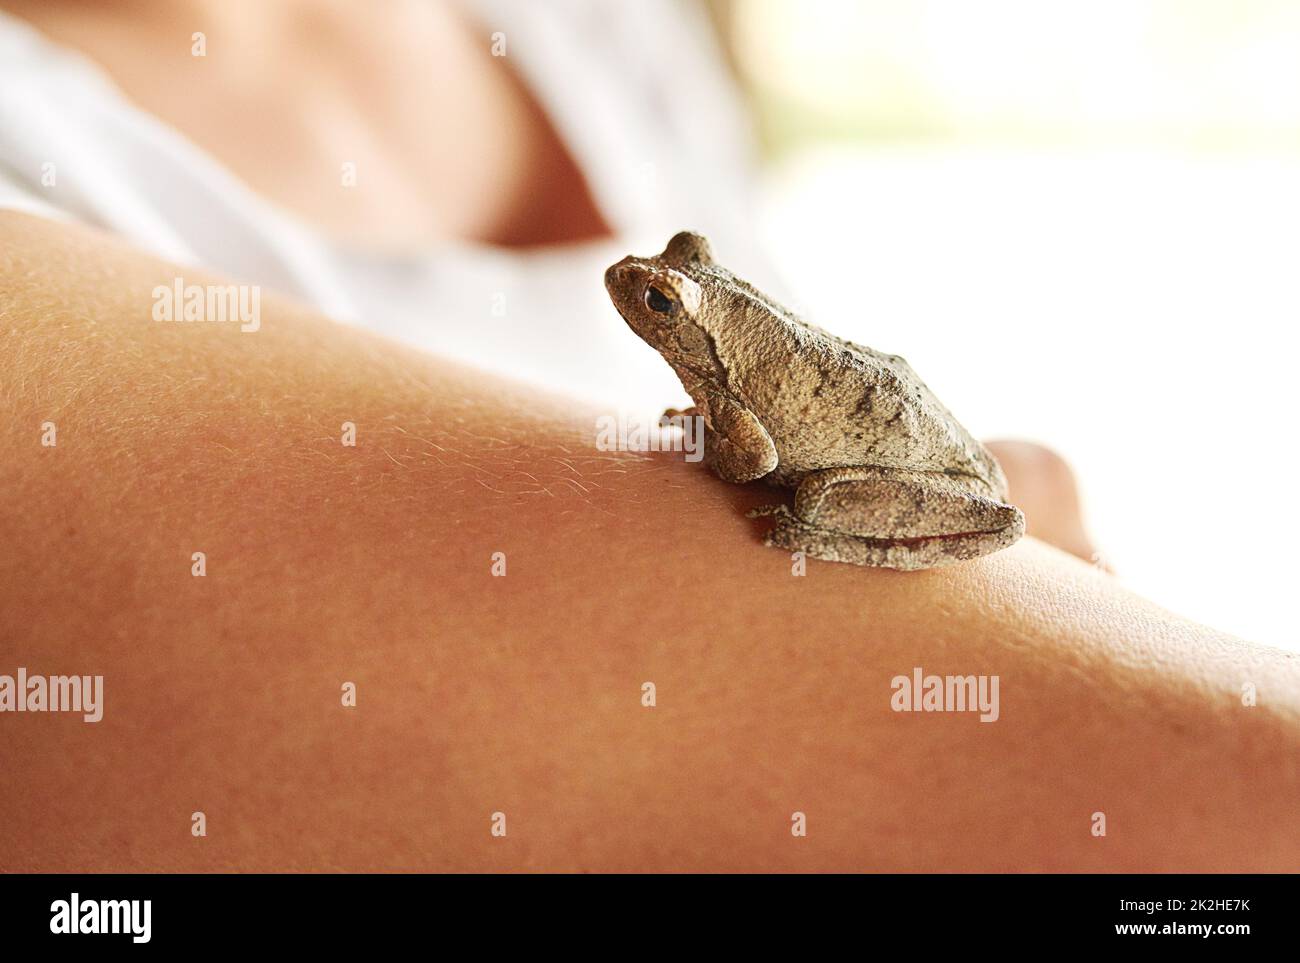 Such a cute little guy. Shot of a tiny frog sitting on a womans arm. Stock Photo